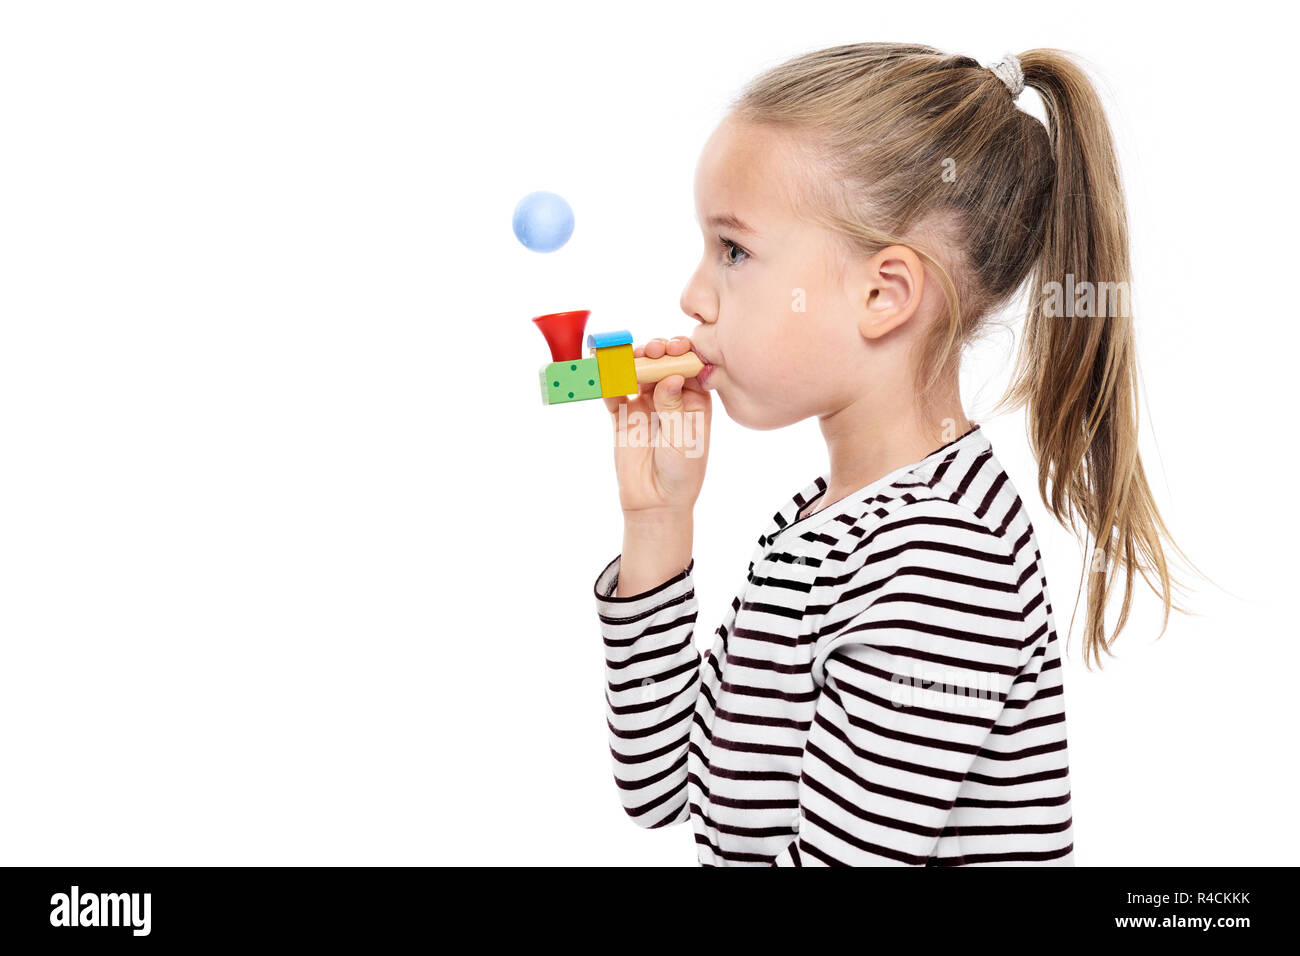 Cute young girl making special exercises at speech therapy office. Child speech therapy concept on white background. Speech impediment corrective exer Stock Photo